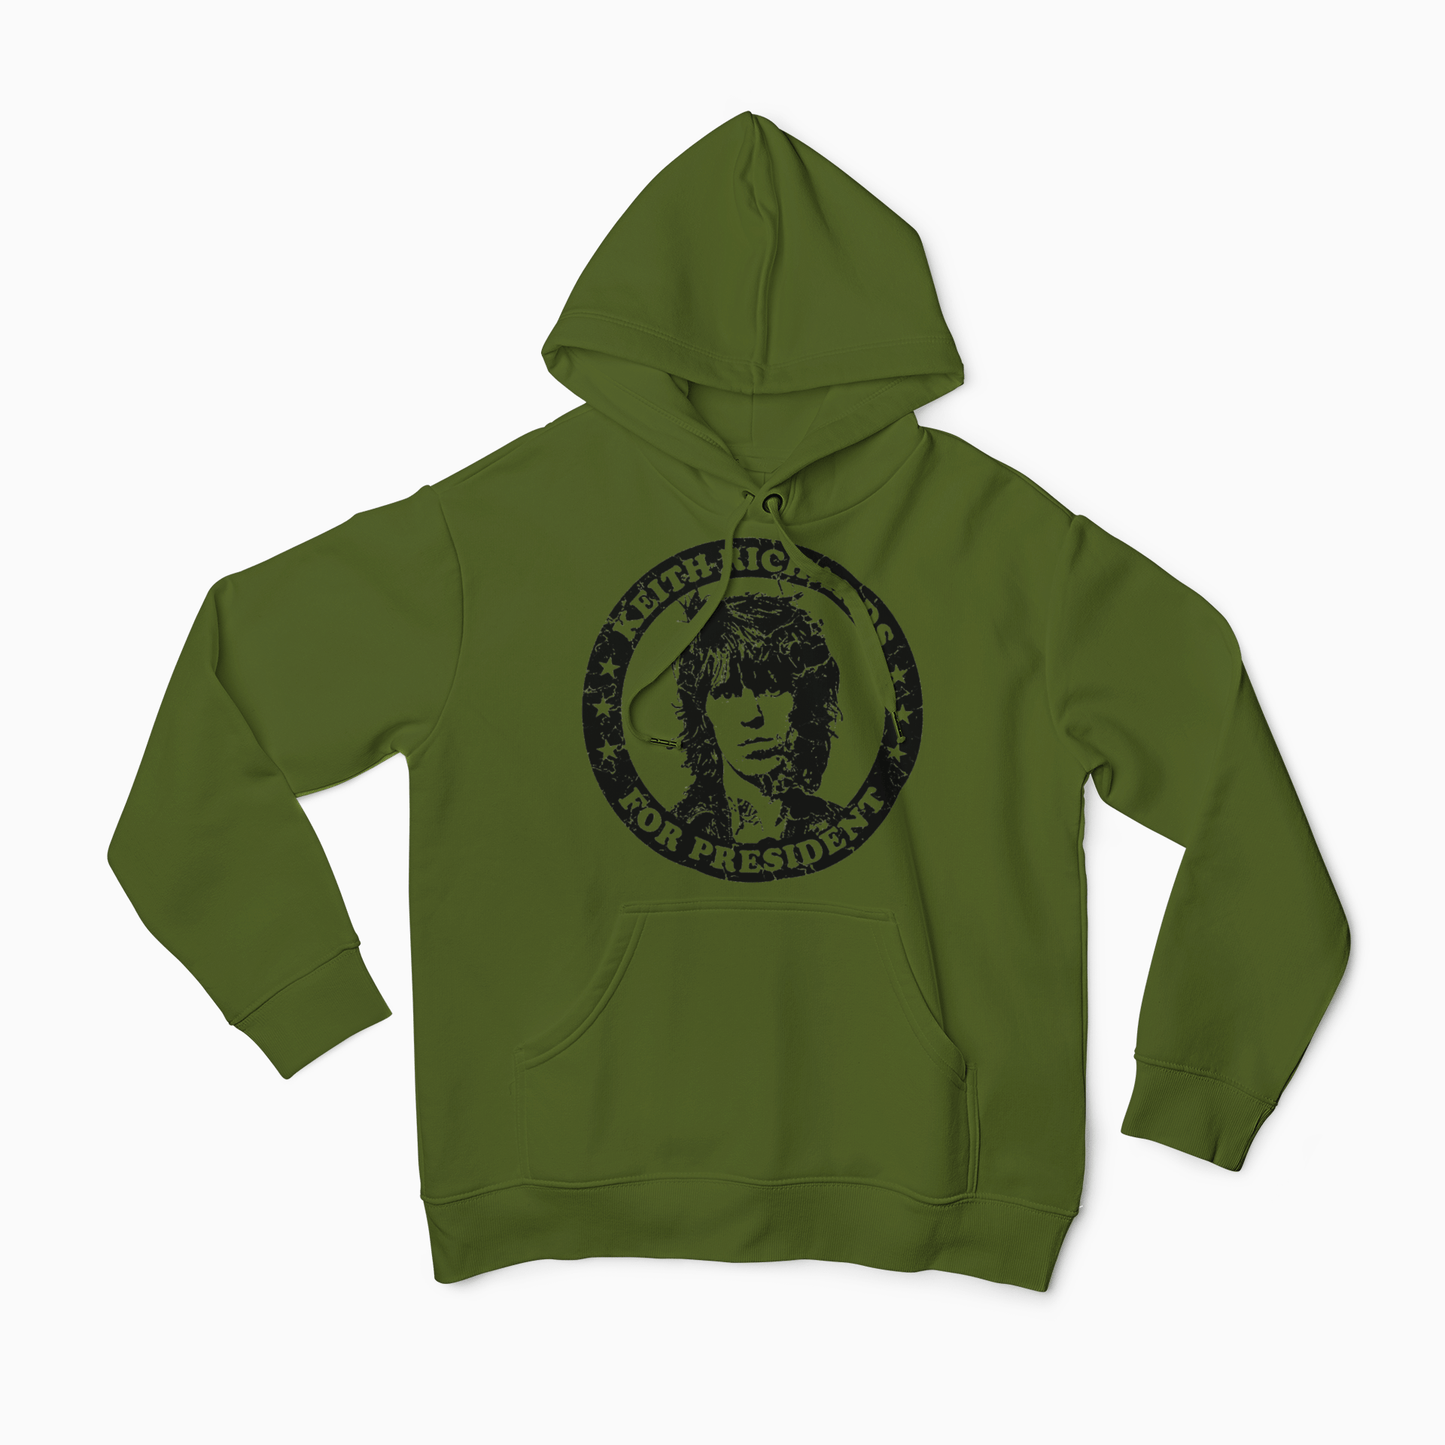 Keith Richards For President Hoodie Pull Over Hoodies Rockvieetees